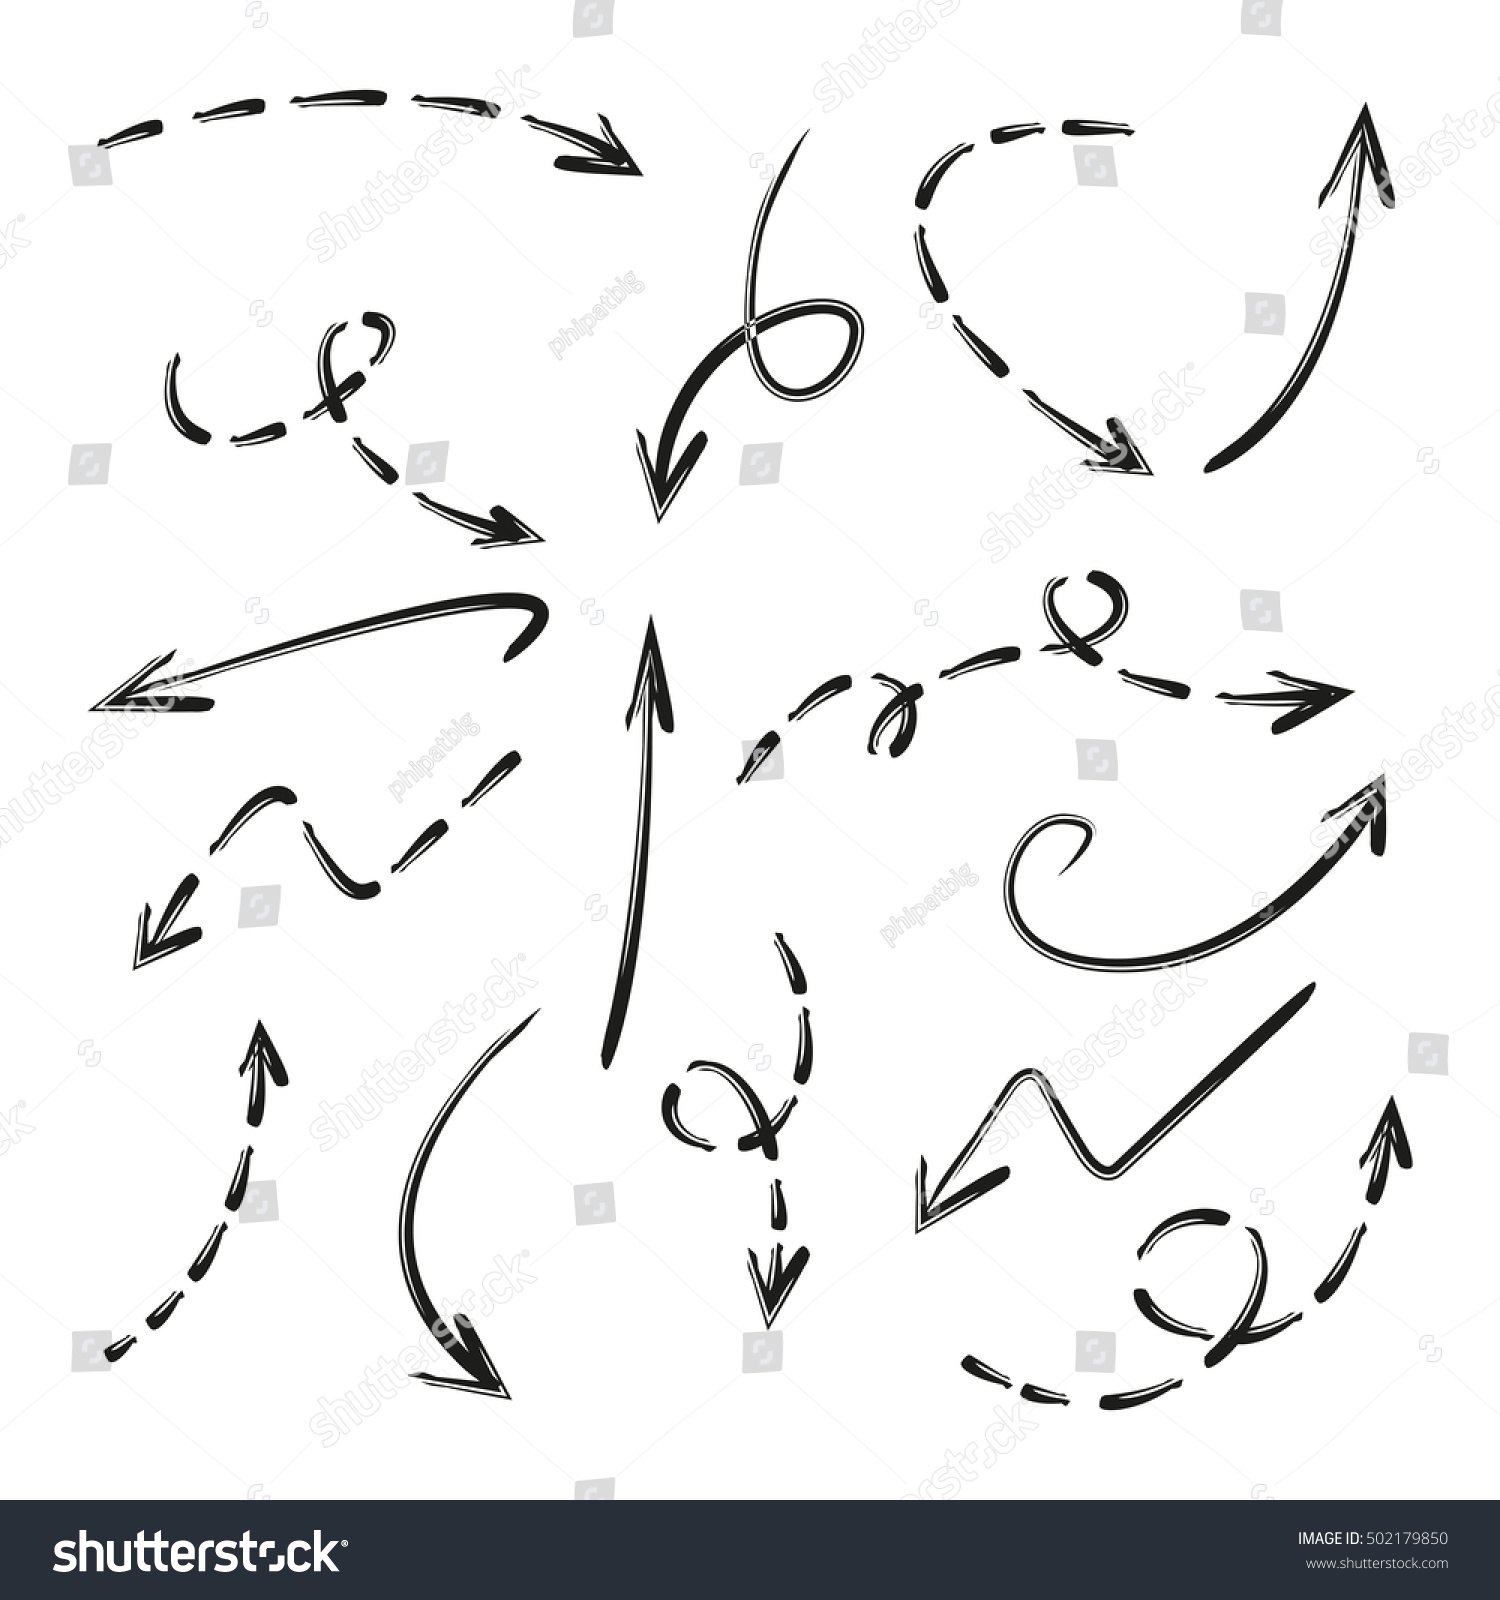 Hand Drawn Arrows Dashed Arrows Stock Vector Illustration 502179850 Shutterstock 6348